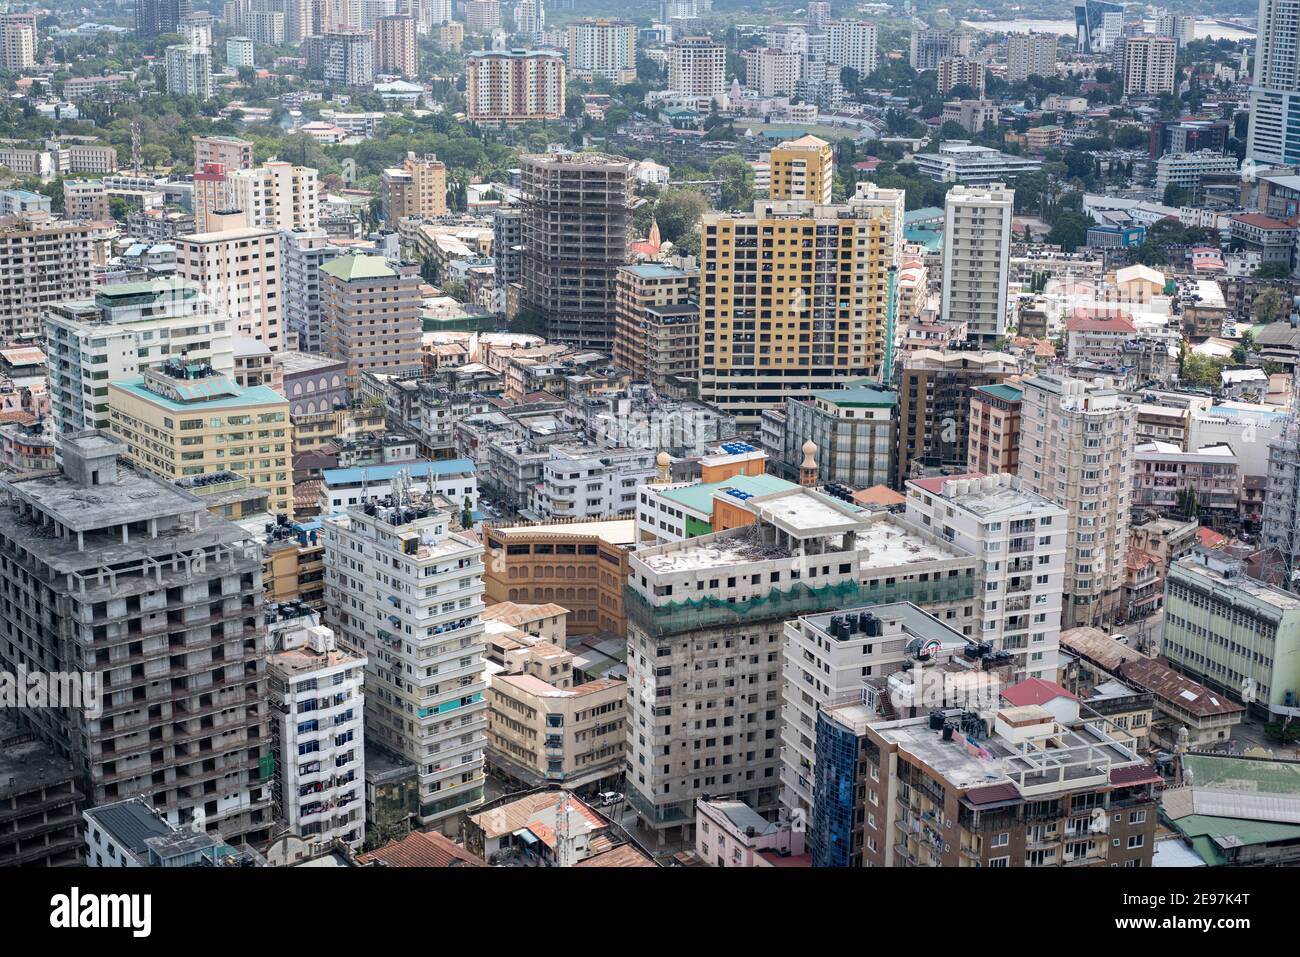 Aerial view of Dar Es Salaam capital of Tanzania in Africa Stock Photo -  Alamy